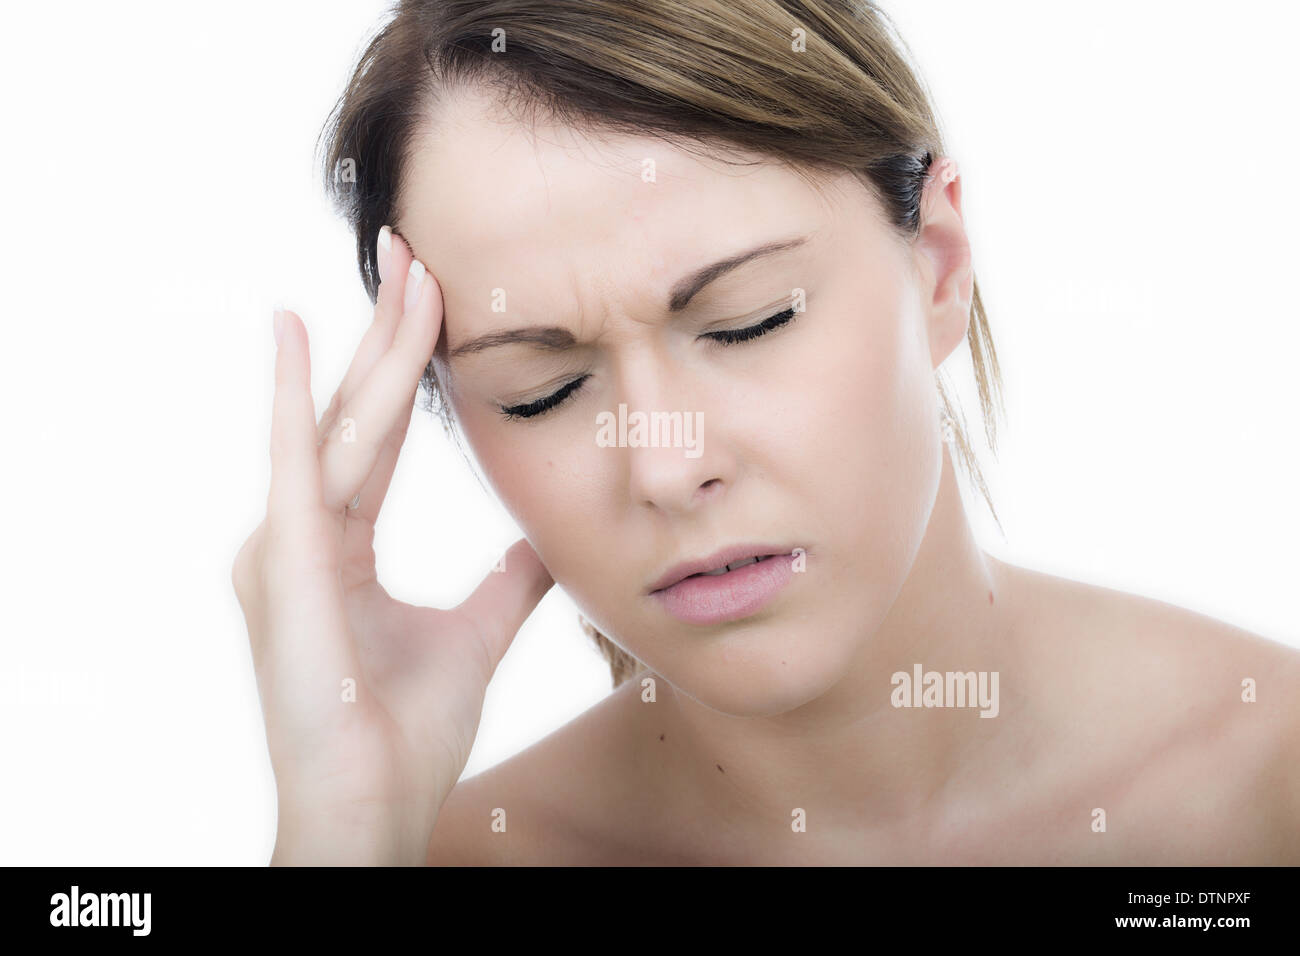 Sad Young Woman with a Headache Stock Photo